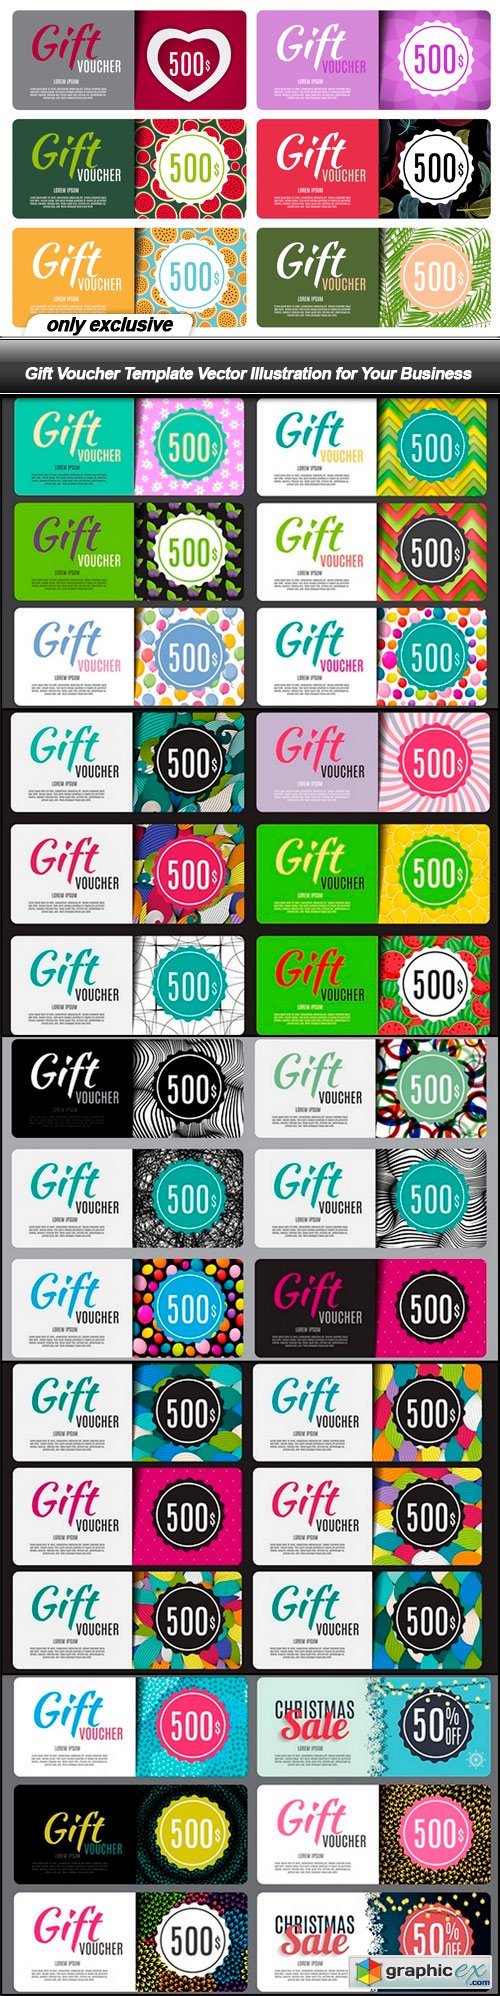 Gift Voucher Template Vector Illustration for Your Business - 6 EPS